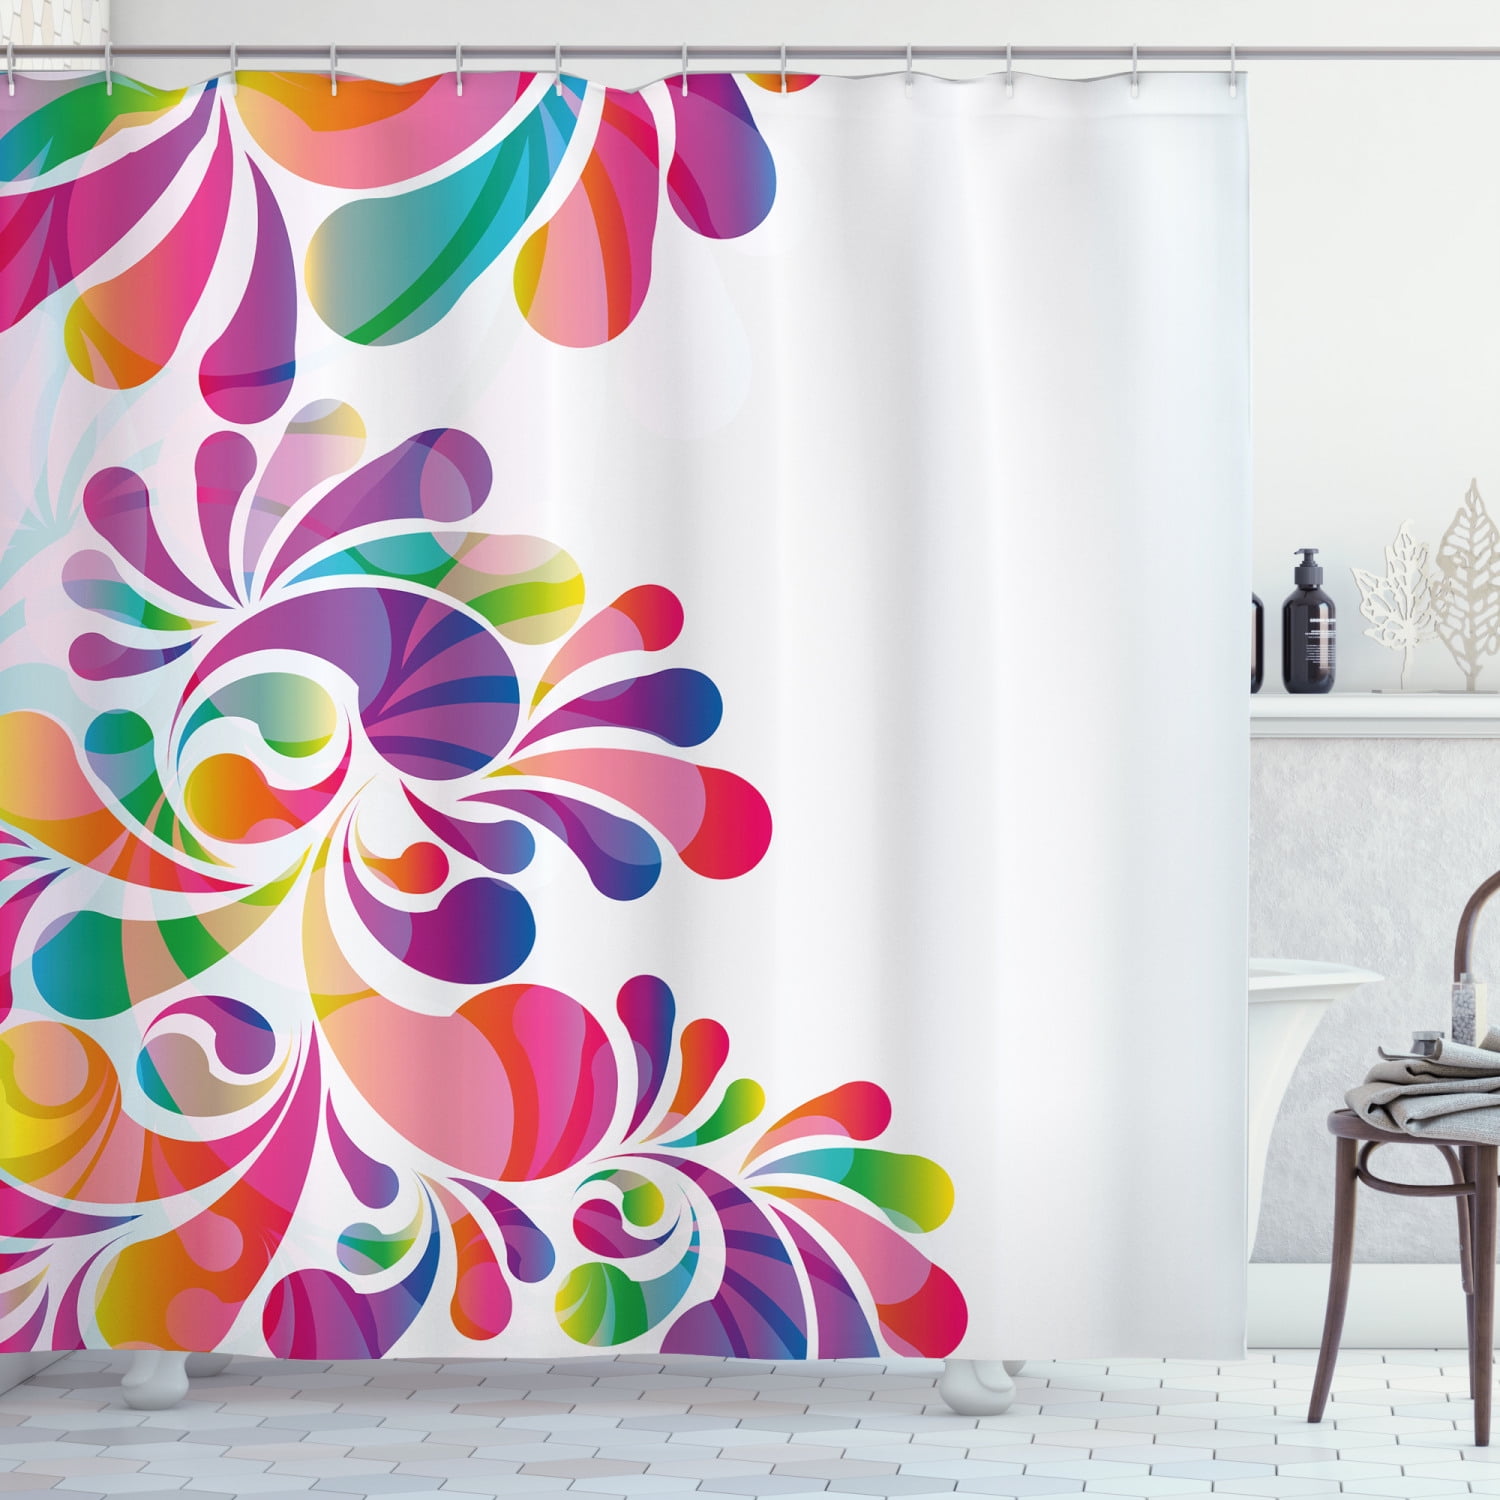 Abstract Rainbow Swirl Colorful Pattern Shower Curtain Liner Waterproof Fabric 